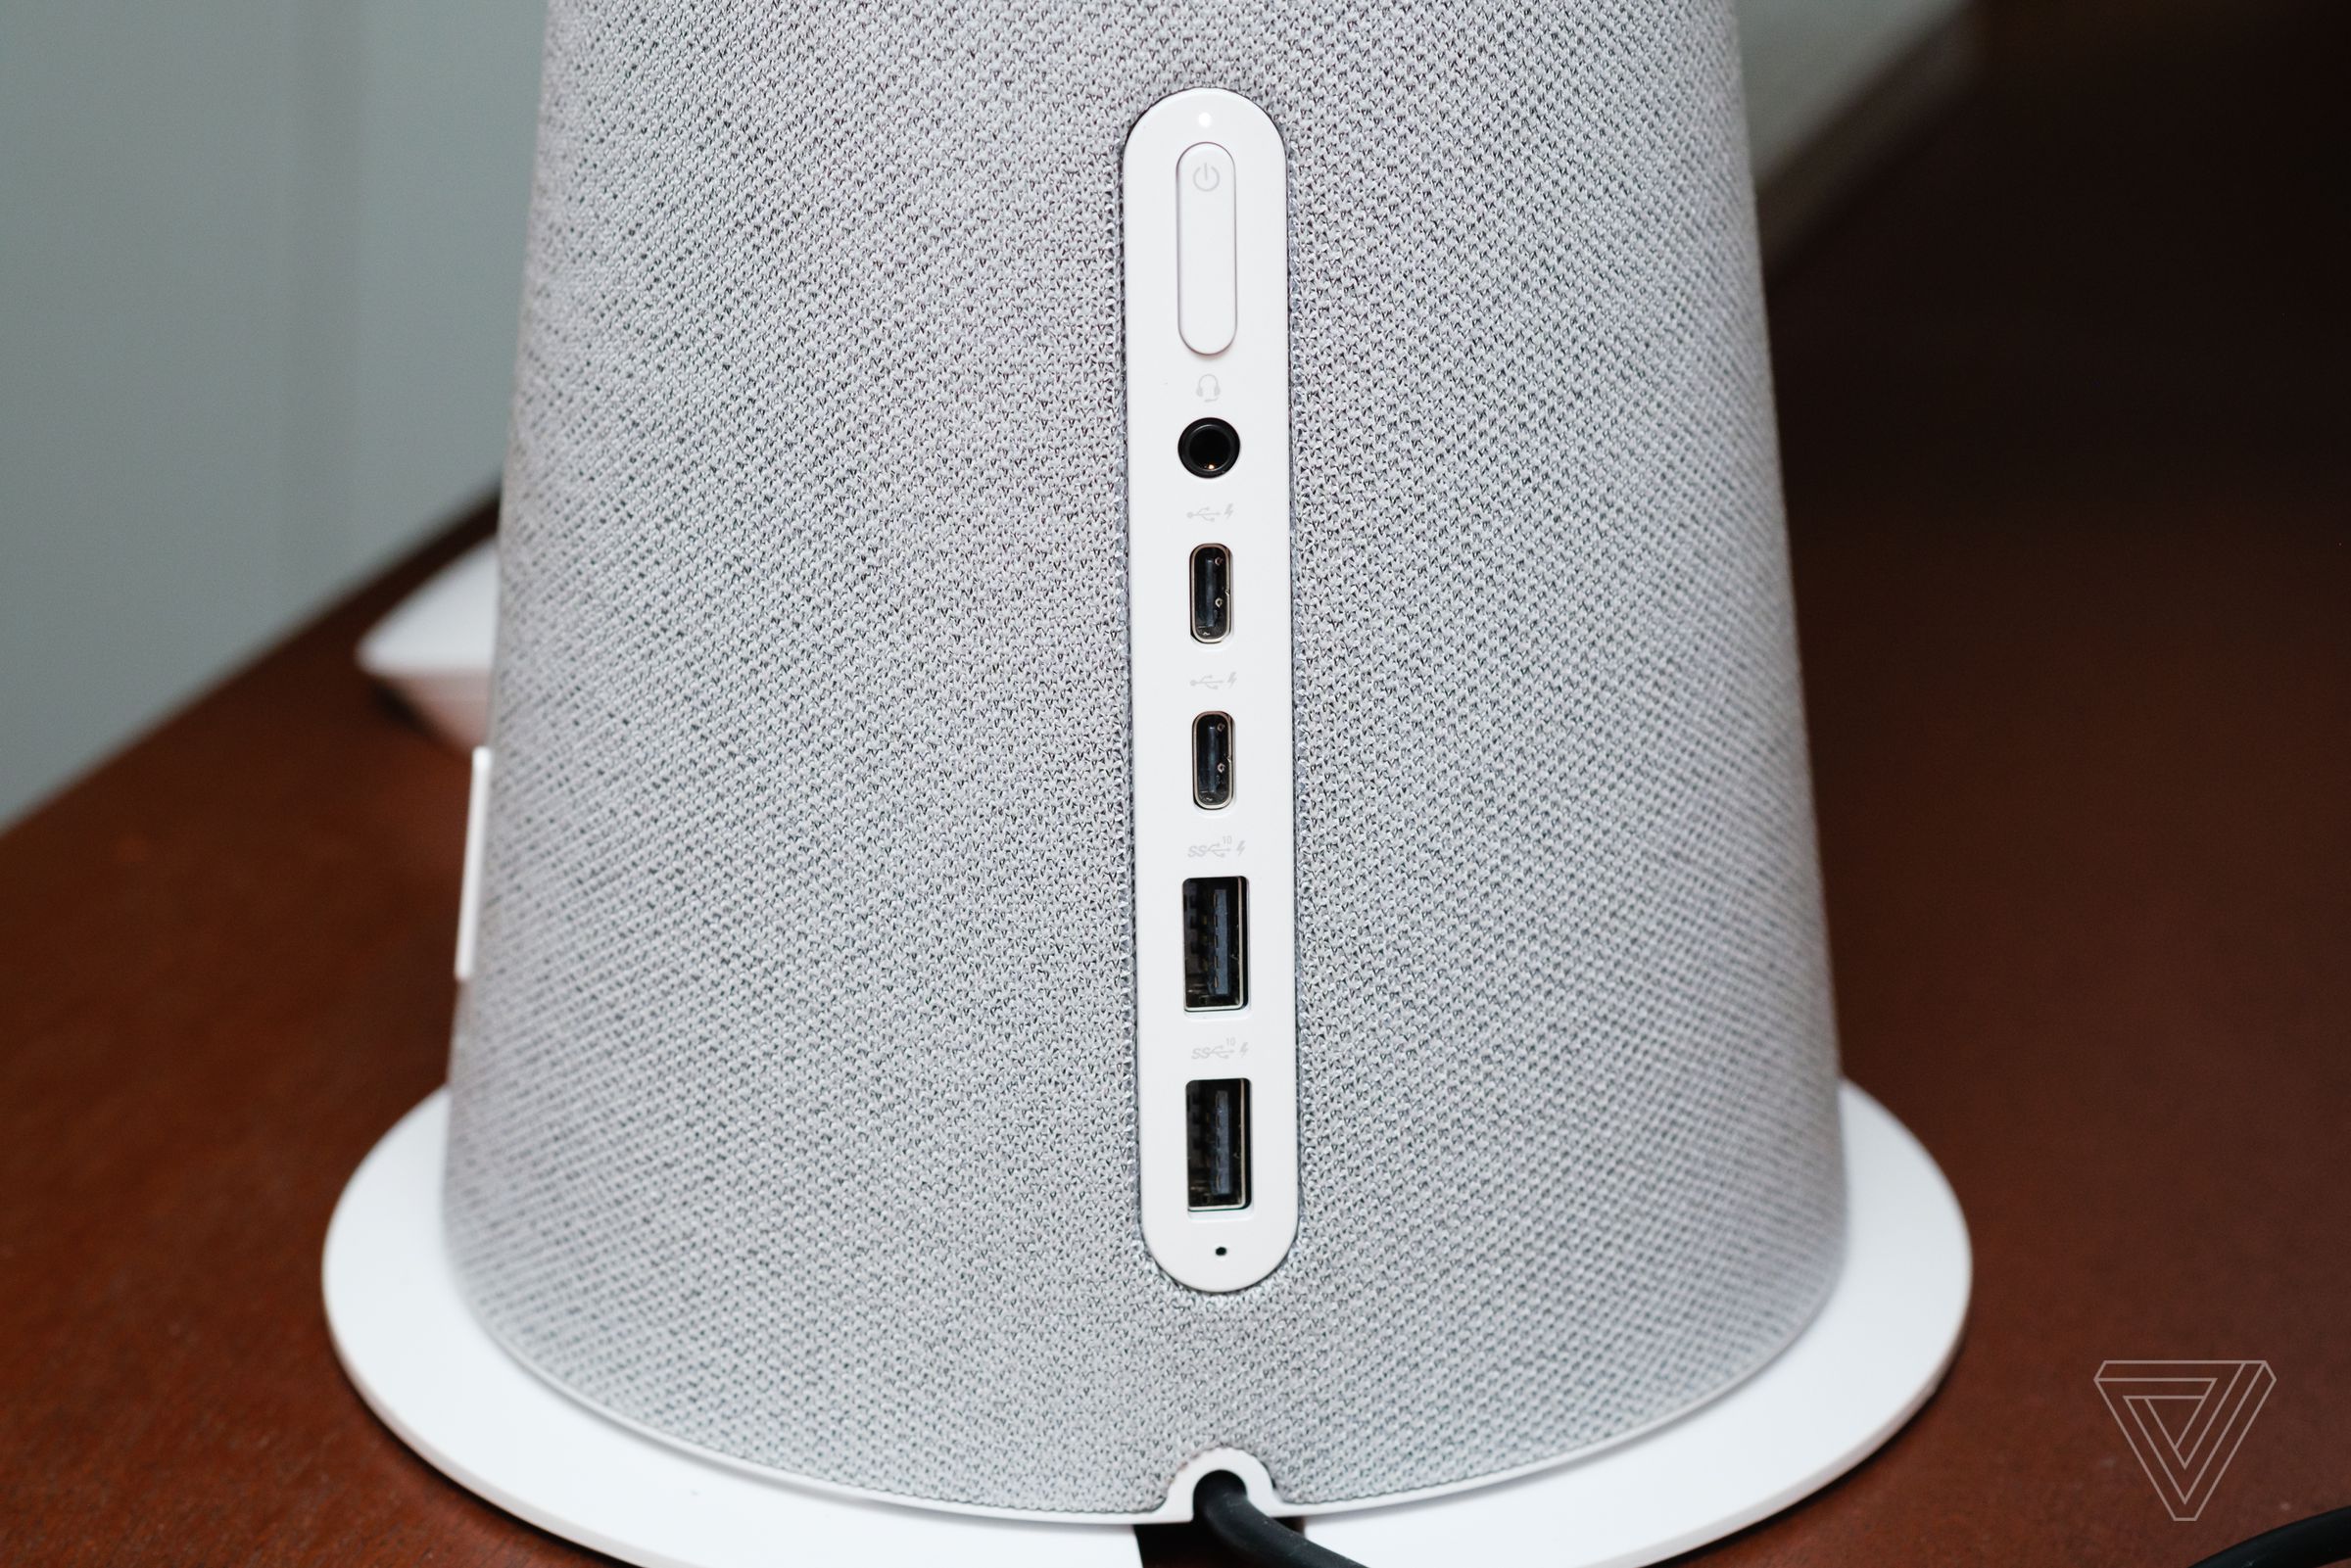 All of the Chromebase’s ports are arranged on the back of the base.